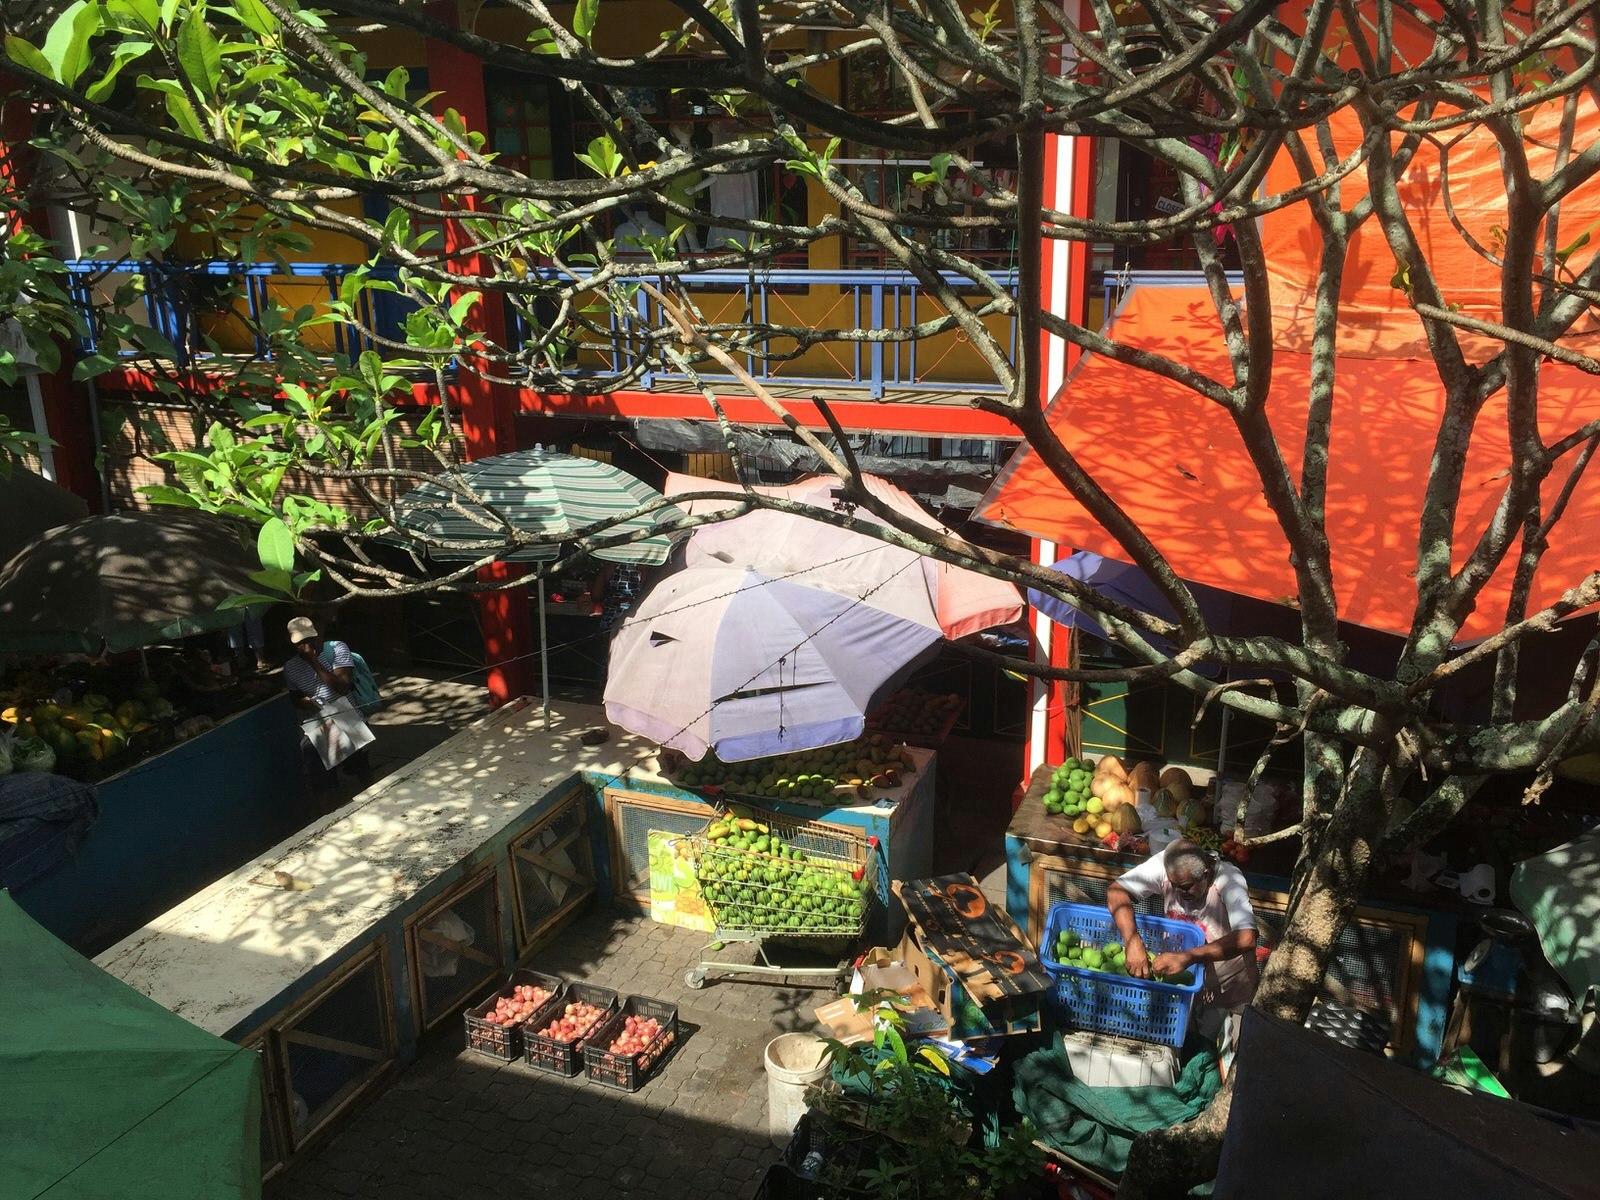 Looking down through branches of some trees growing in the market, some fruit stands sit beneath colourful umbrellas © Matt Phillips / Lonely Planet